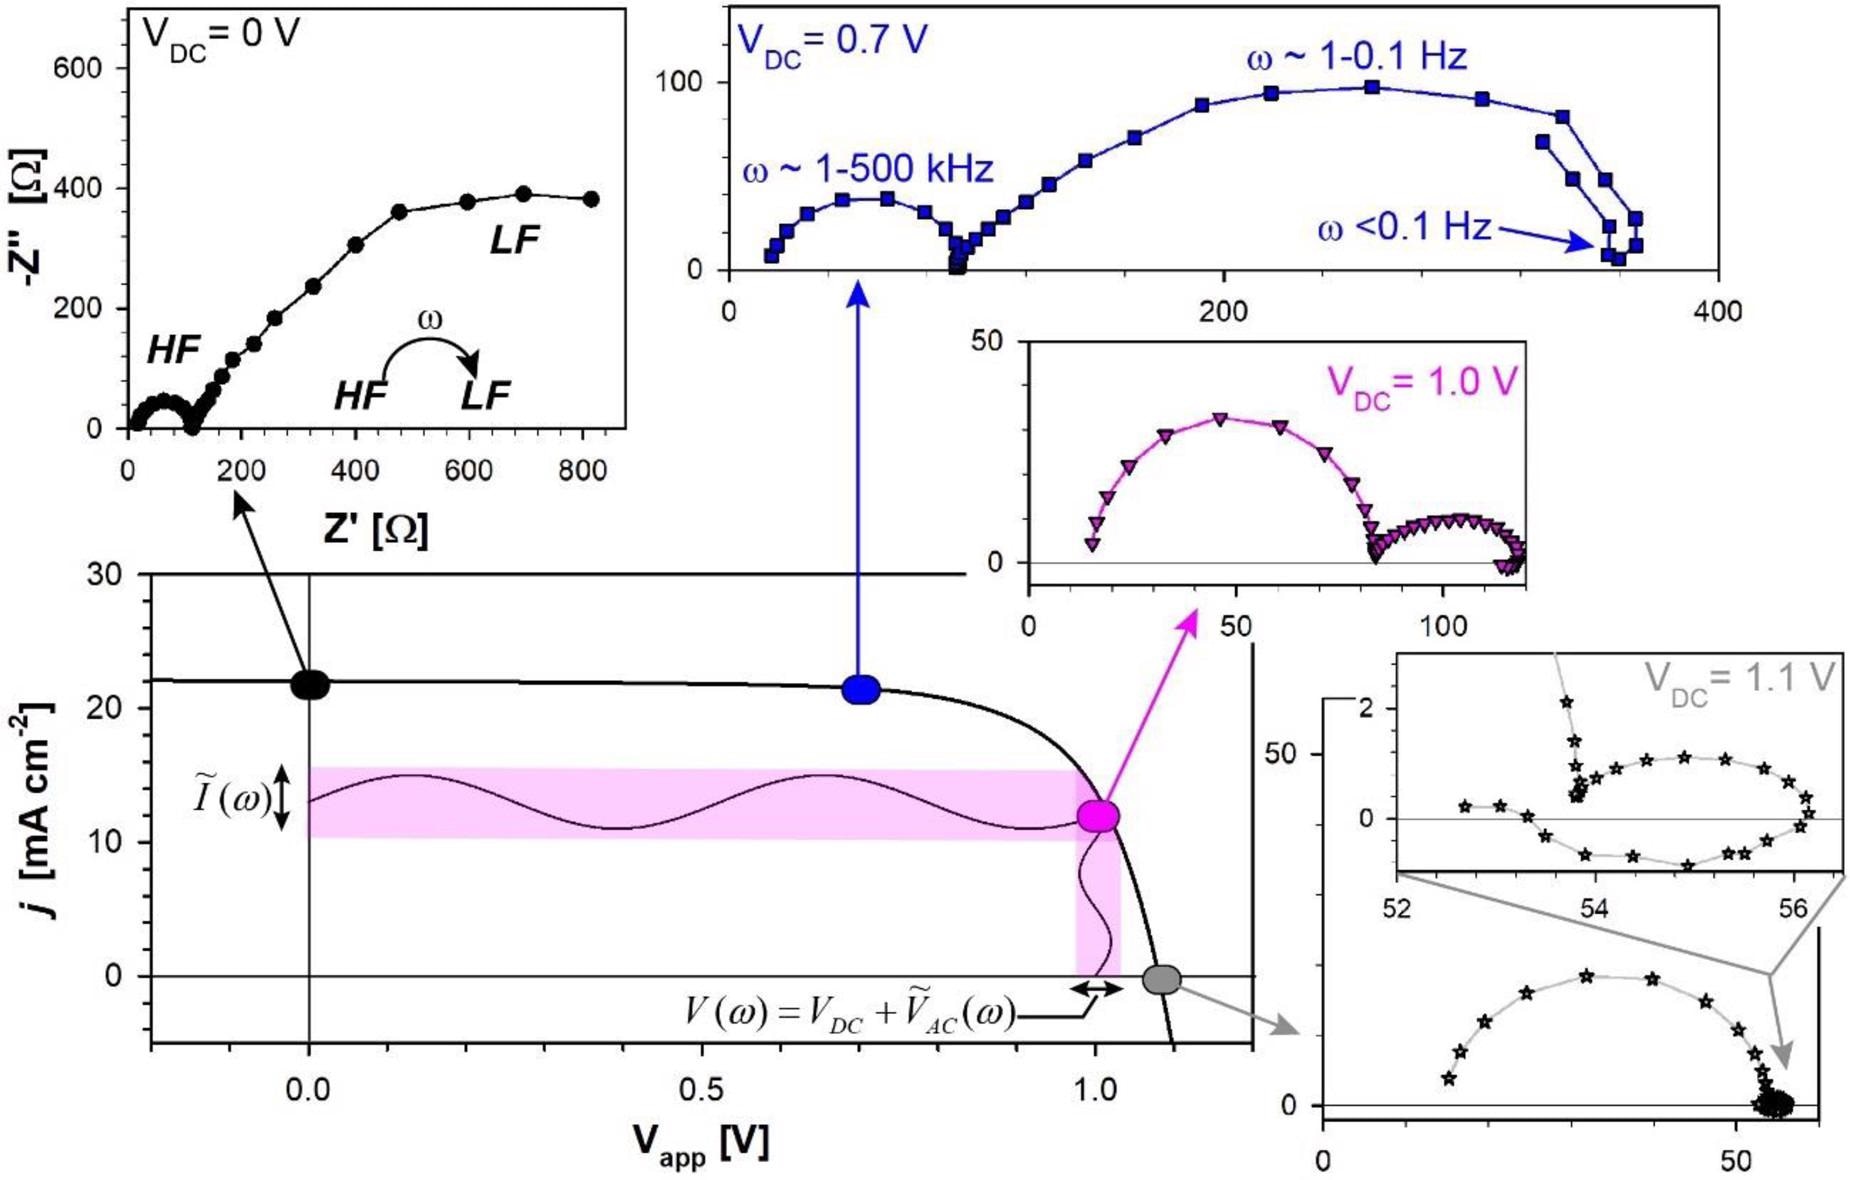 J–V curve of a perovskite solar cell with a diagram that explains the impedance spectroscopy measurement and representative complex impedance plots measured at different VDC values.